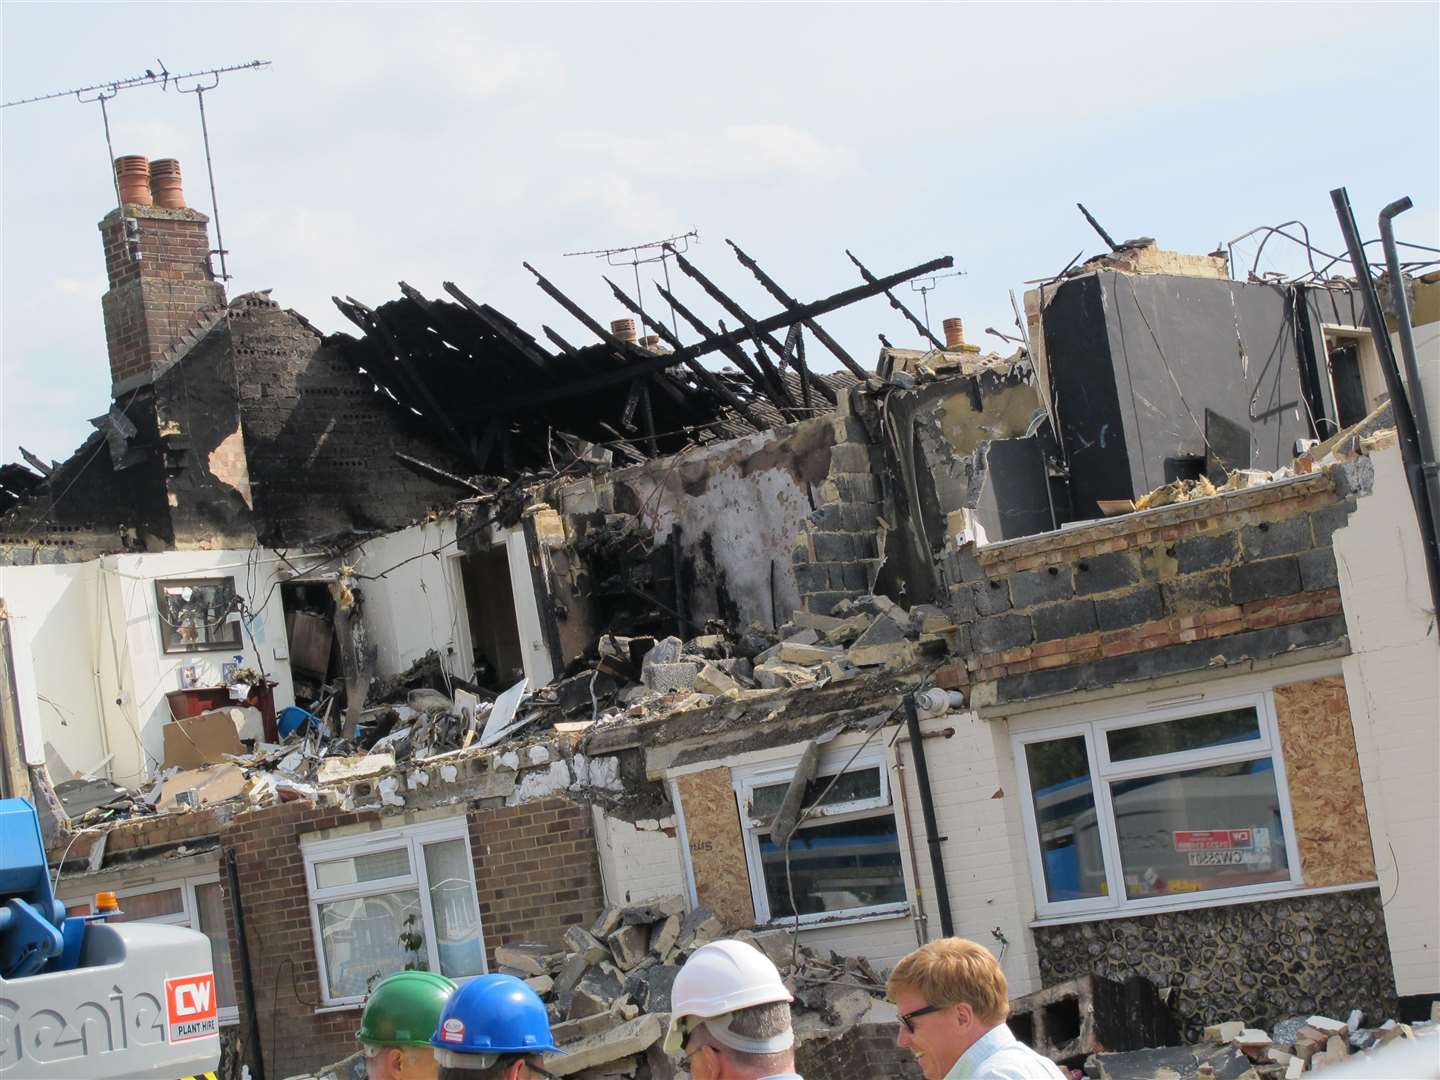 Eight homes on Little Knoll had to be demolished and replaced after the 2015 blast